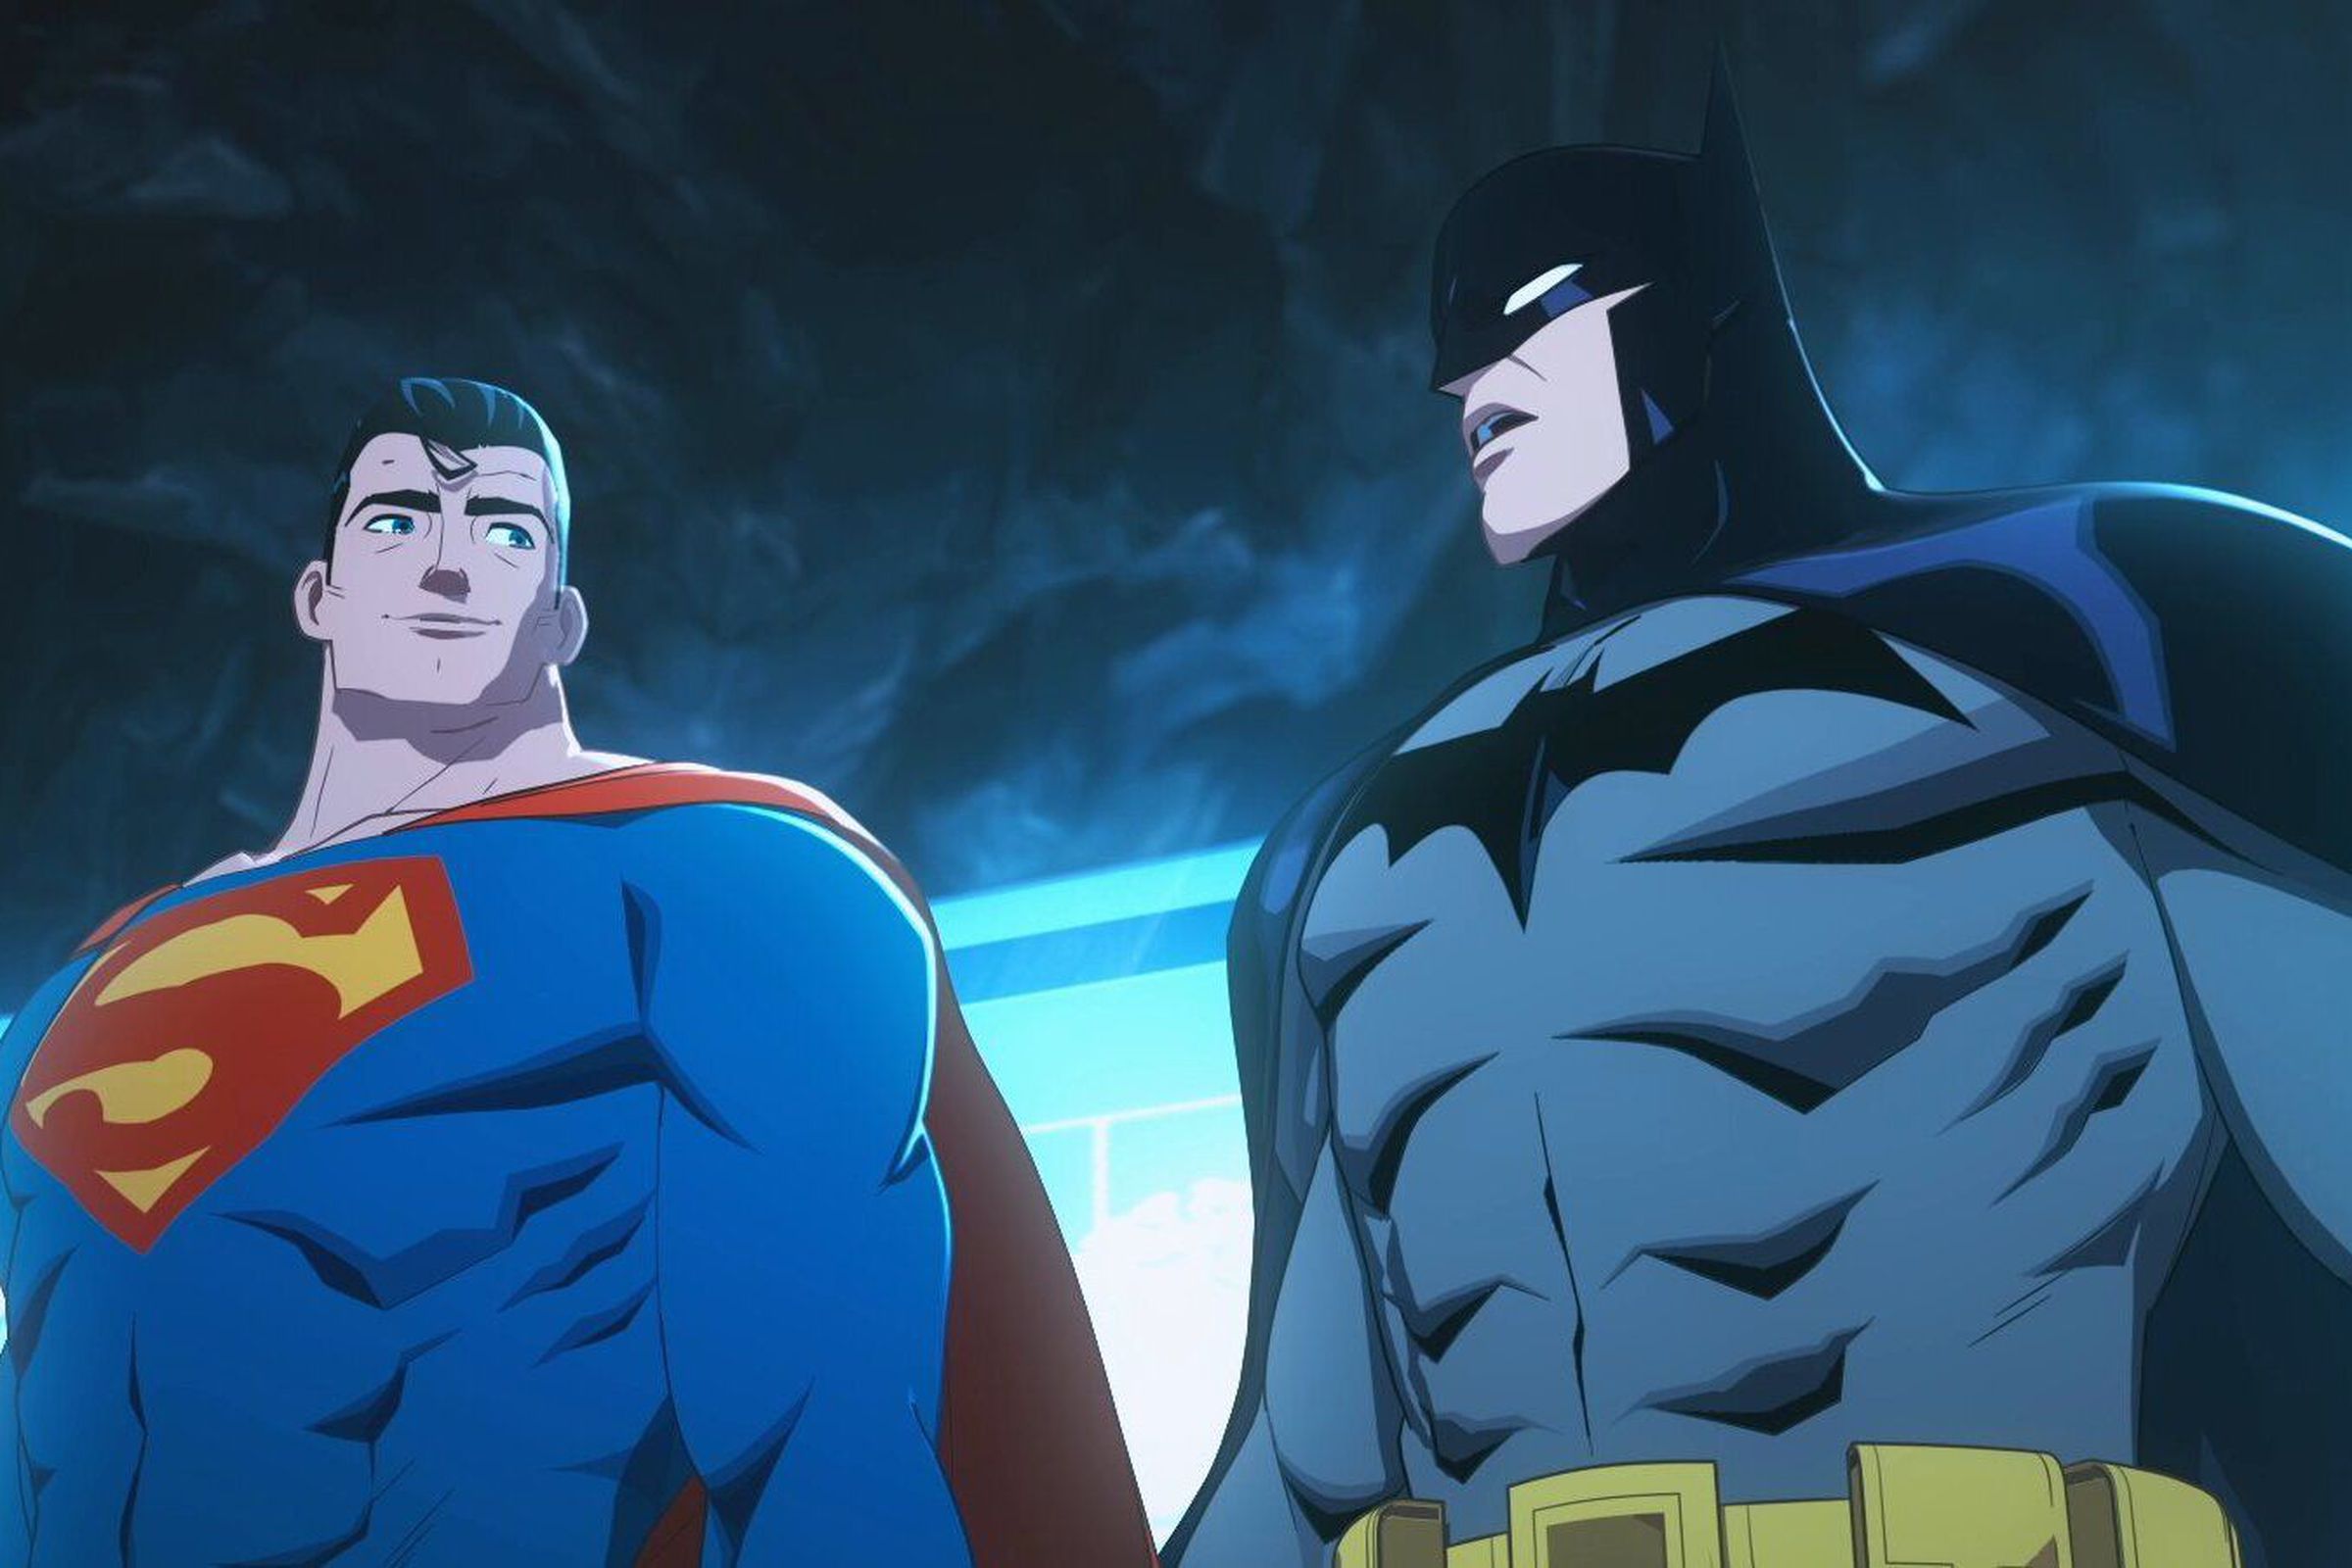 Superman and Batman standing in the Batcave in front of the Batcomputer, which is lighting them both from the back.